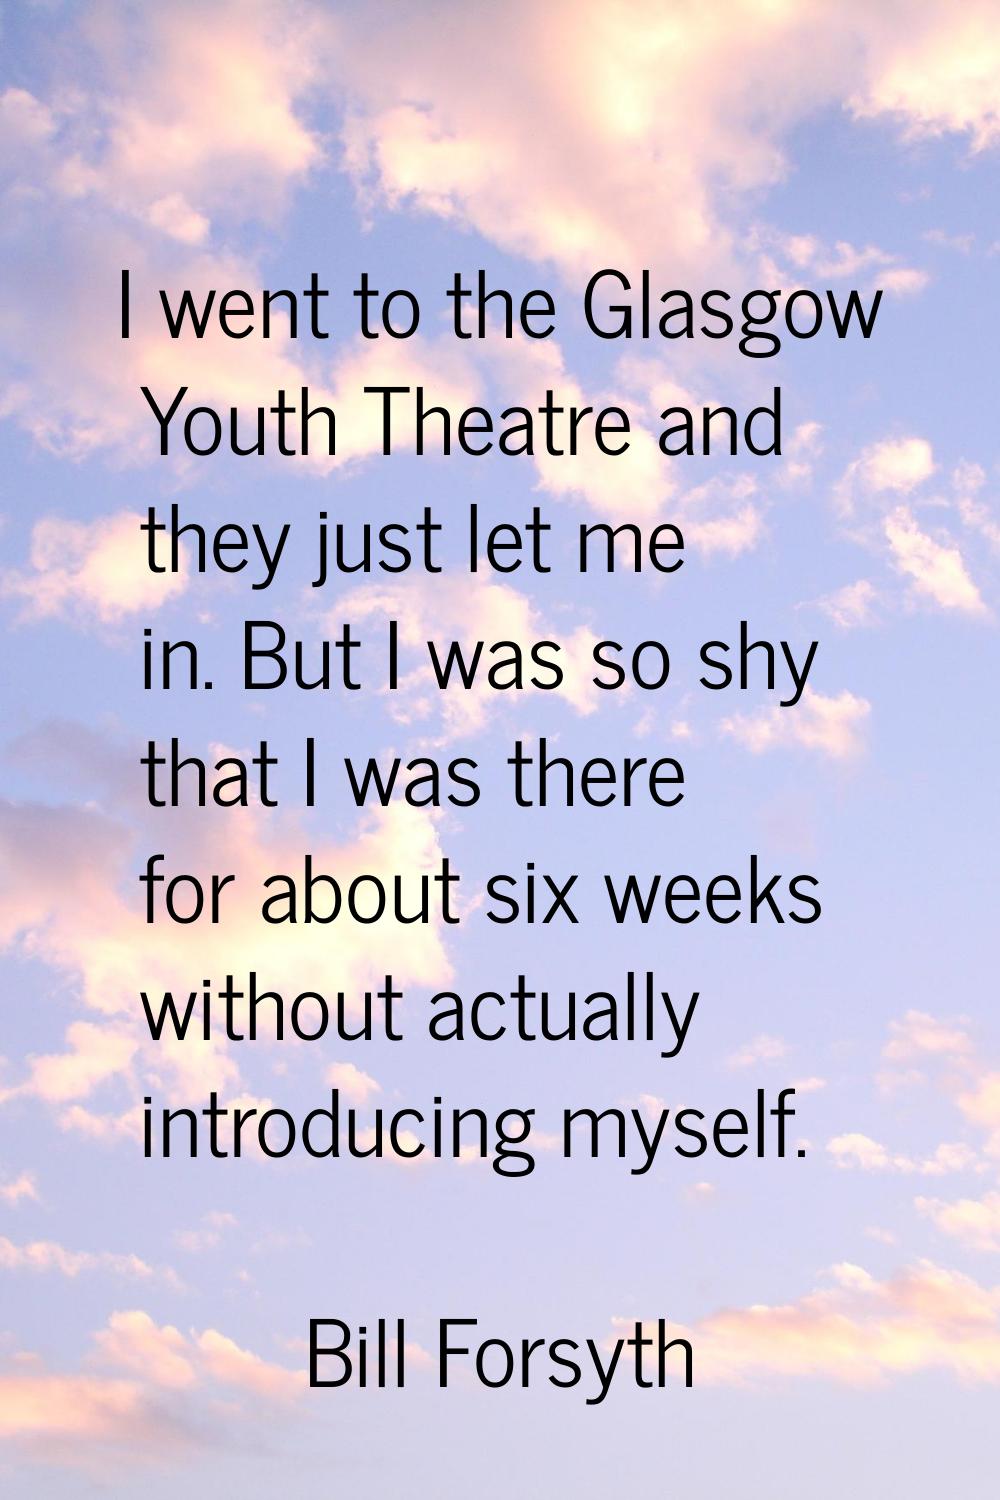 I went to the Glasgow Youth Theatre and they just let me in. But I was so shy that I was there for 